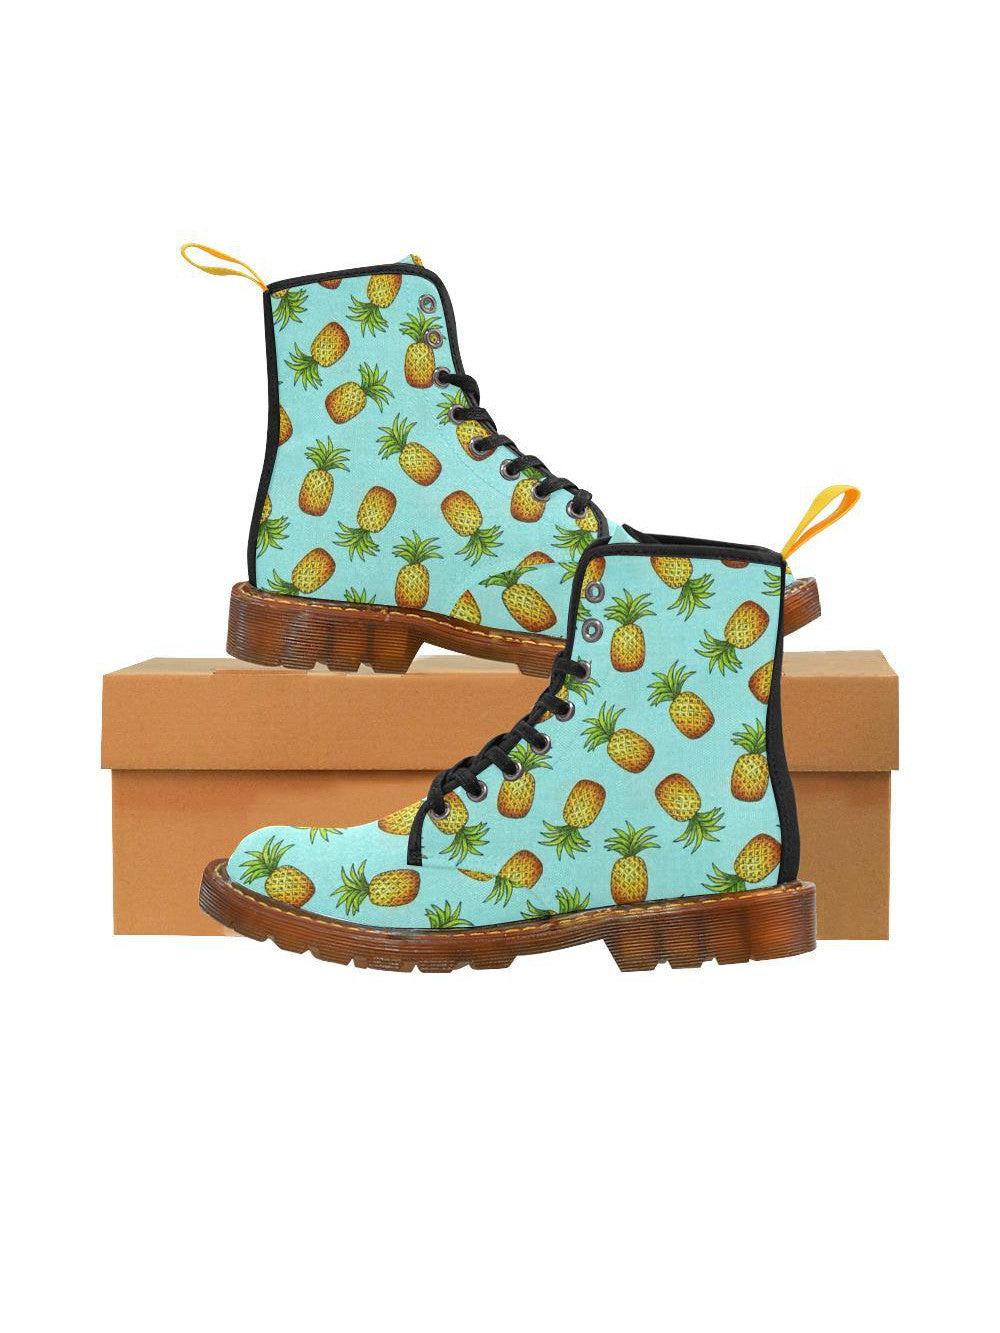 Pina Colada Pineapple Women's Lace Up Combat Boots